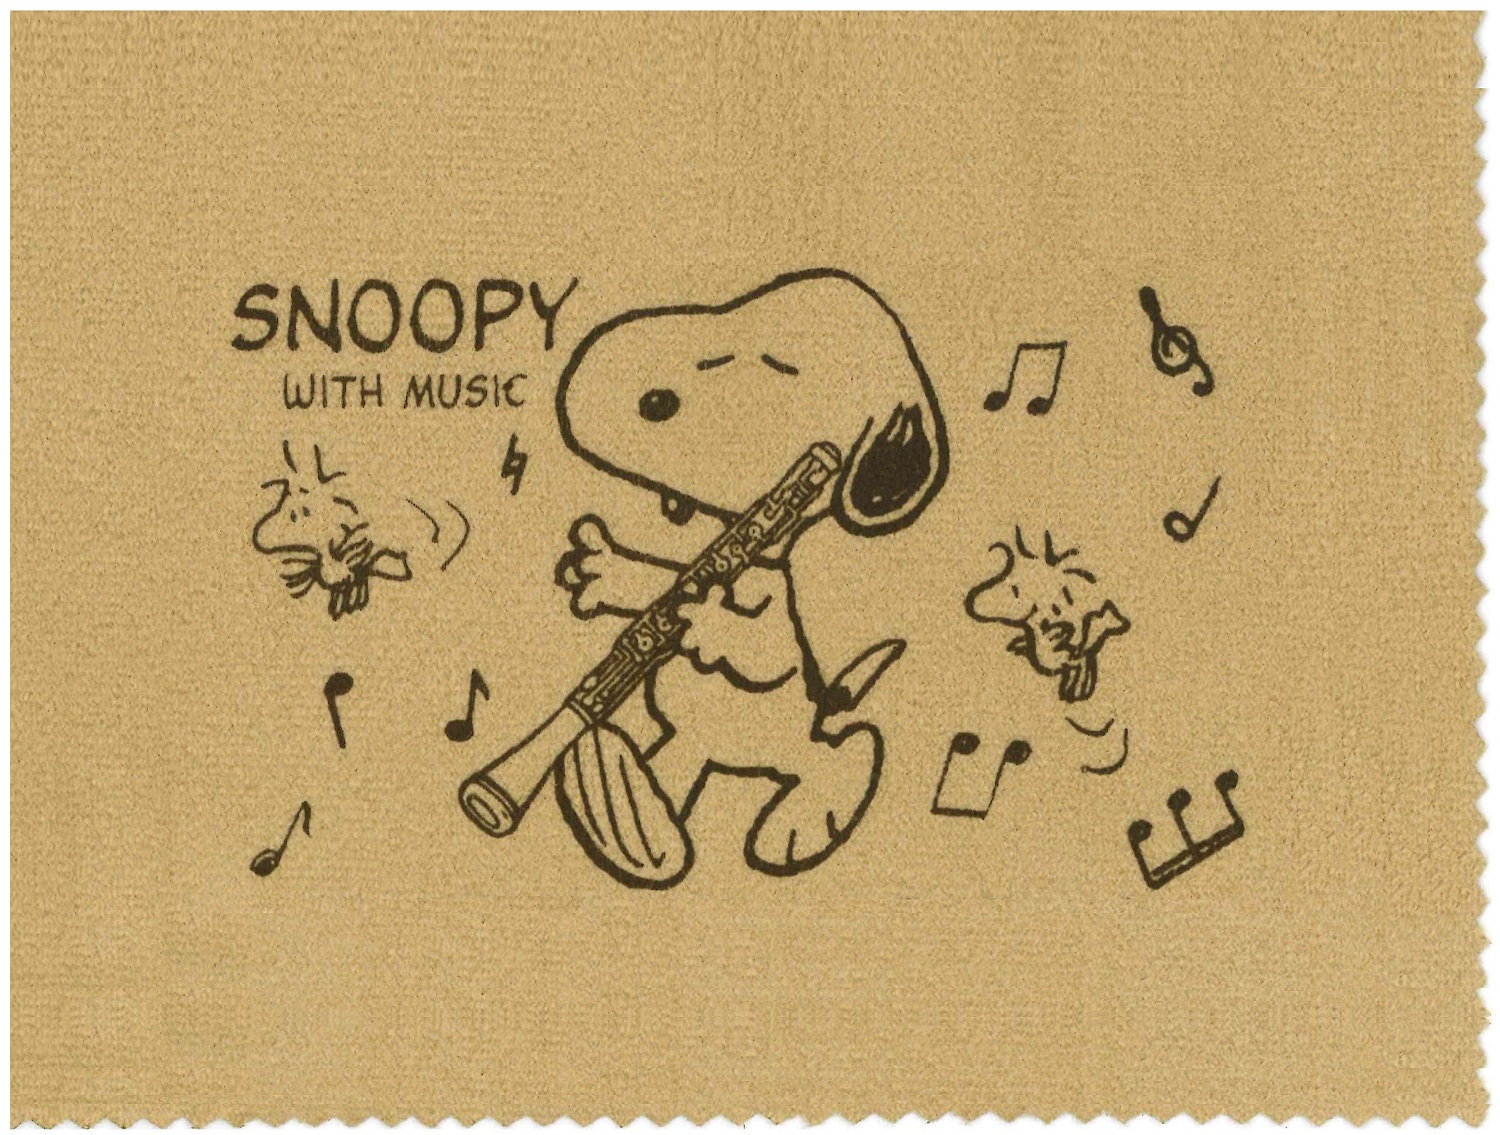 Snoopy With Music スヌーピー Scloth Tp 楽器用クロス Exuconsulting Ch